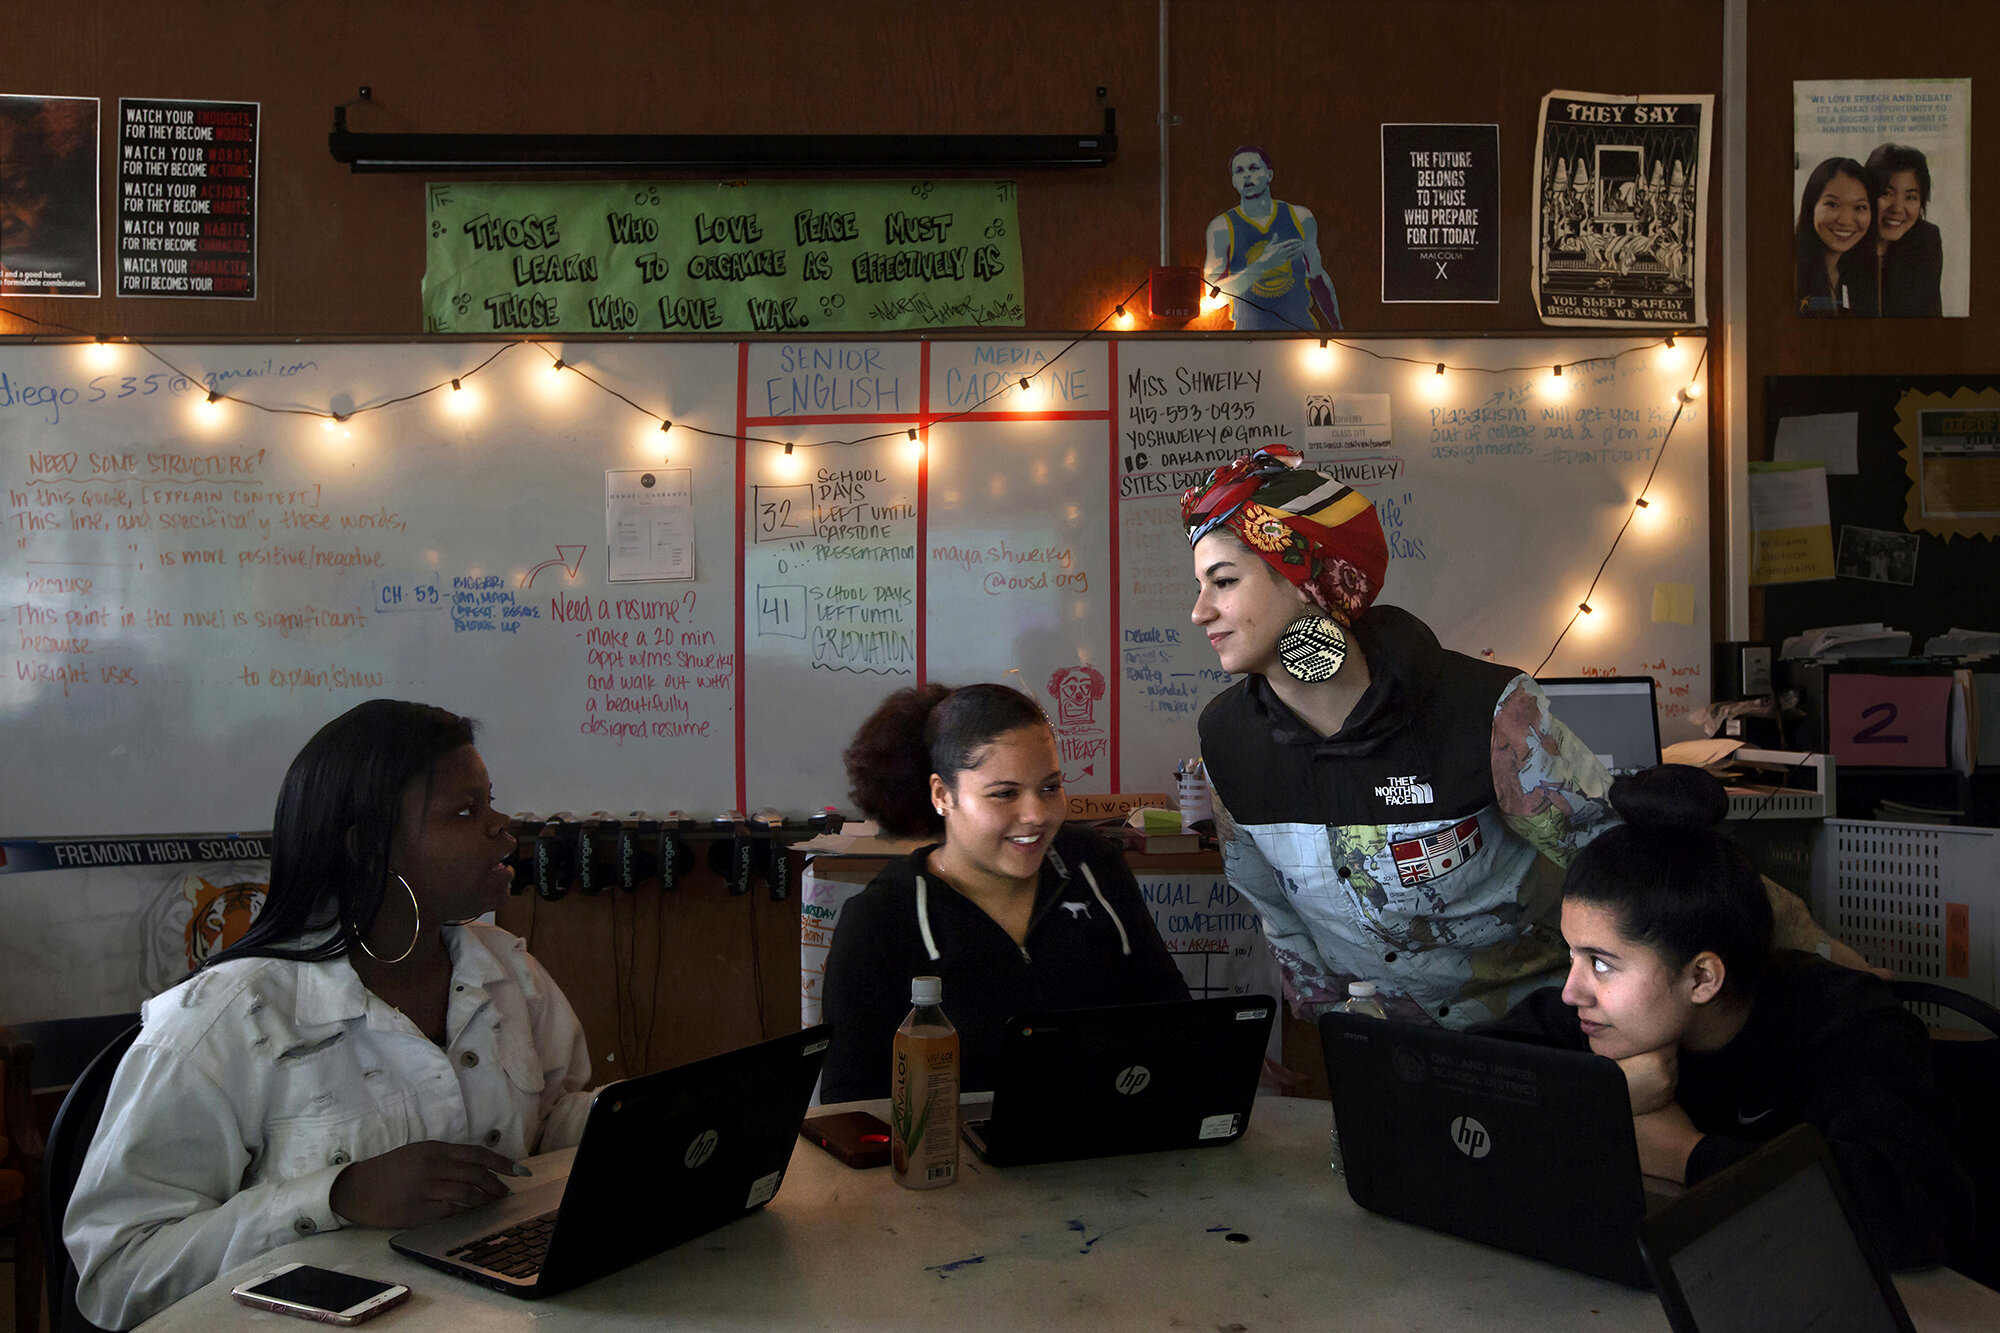   USA. Oakland, California. March, 2018. Maya Shweiky (second from right), 27, a high school English teacher, interacts with her students during a class at the Fremont High School, East Oakland. More than eighty percent of the students at Fremont Hig